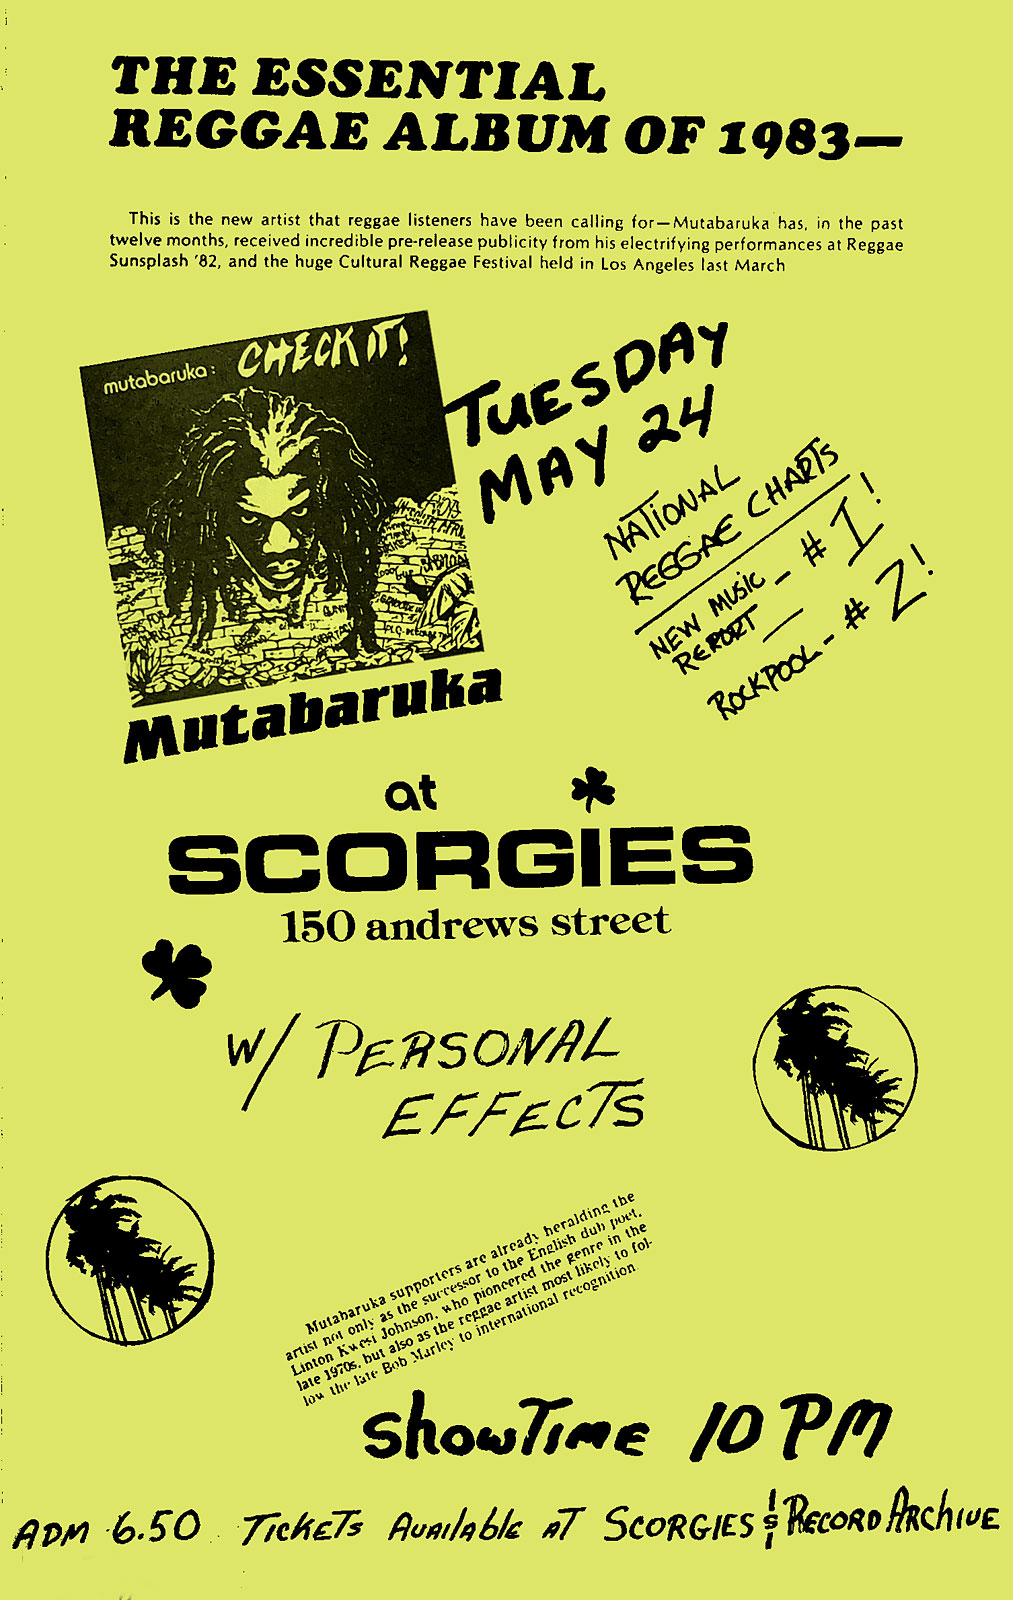 Poster for Mutabaruka and Personal Effects at Scorgie's in Rochester, New York on 05.24.1983. No idea who designed this poster but it was a sensational gig.